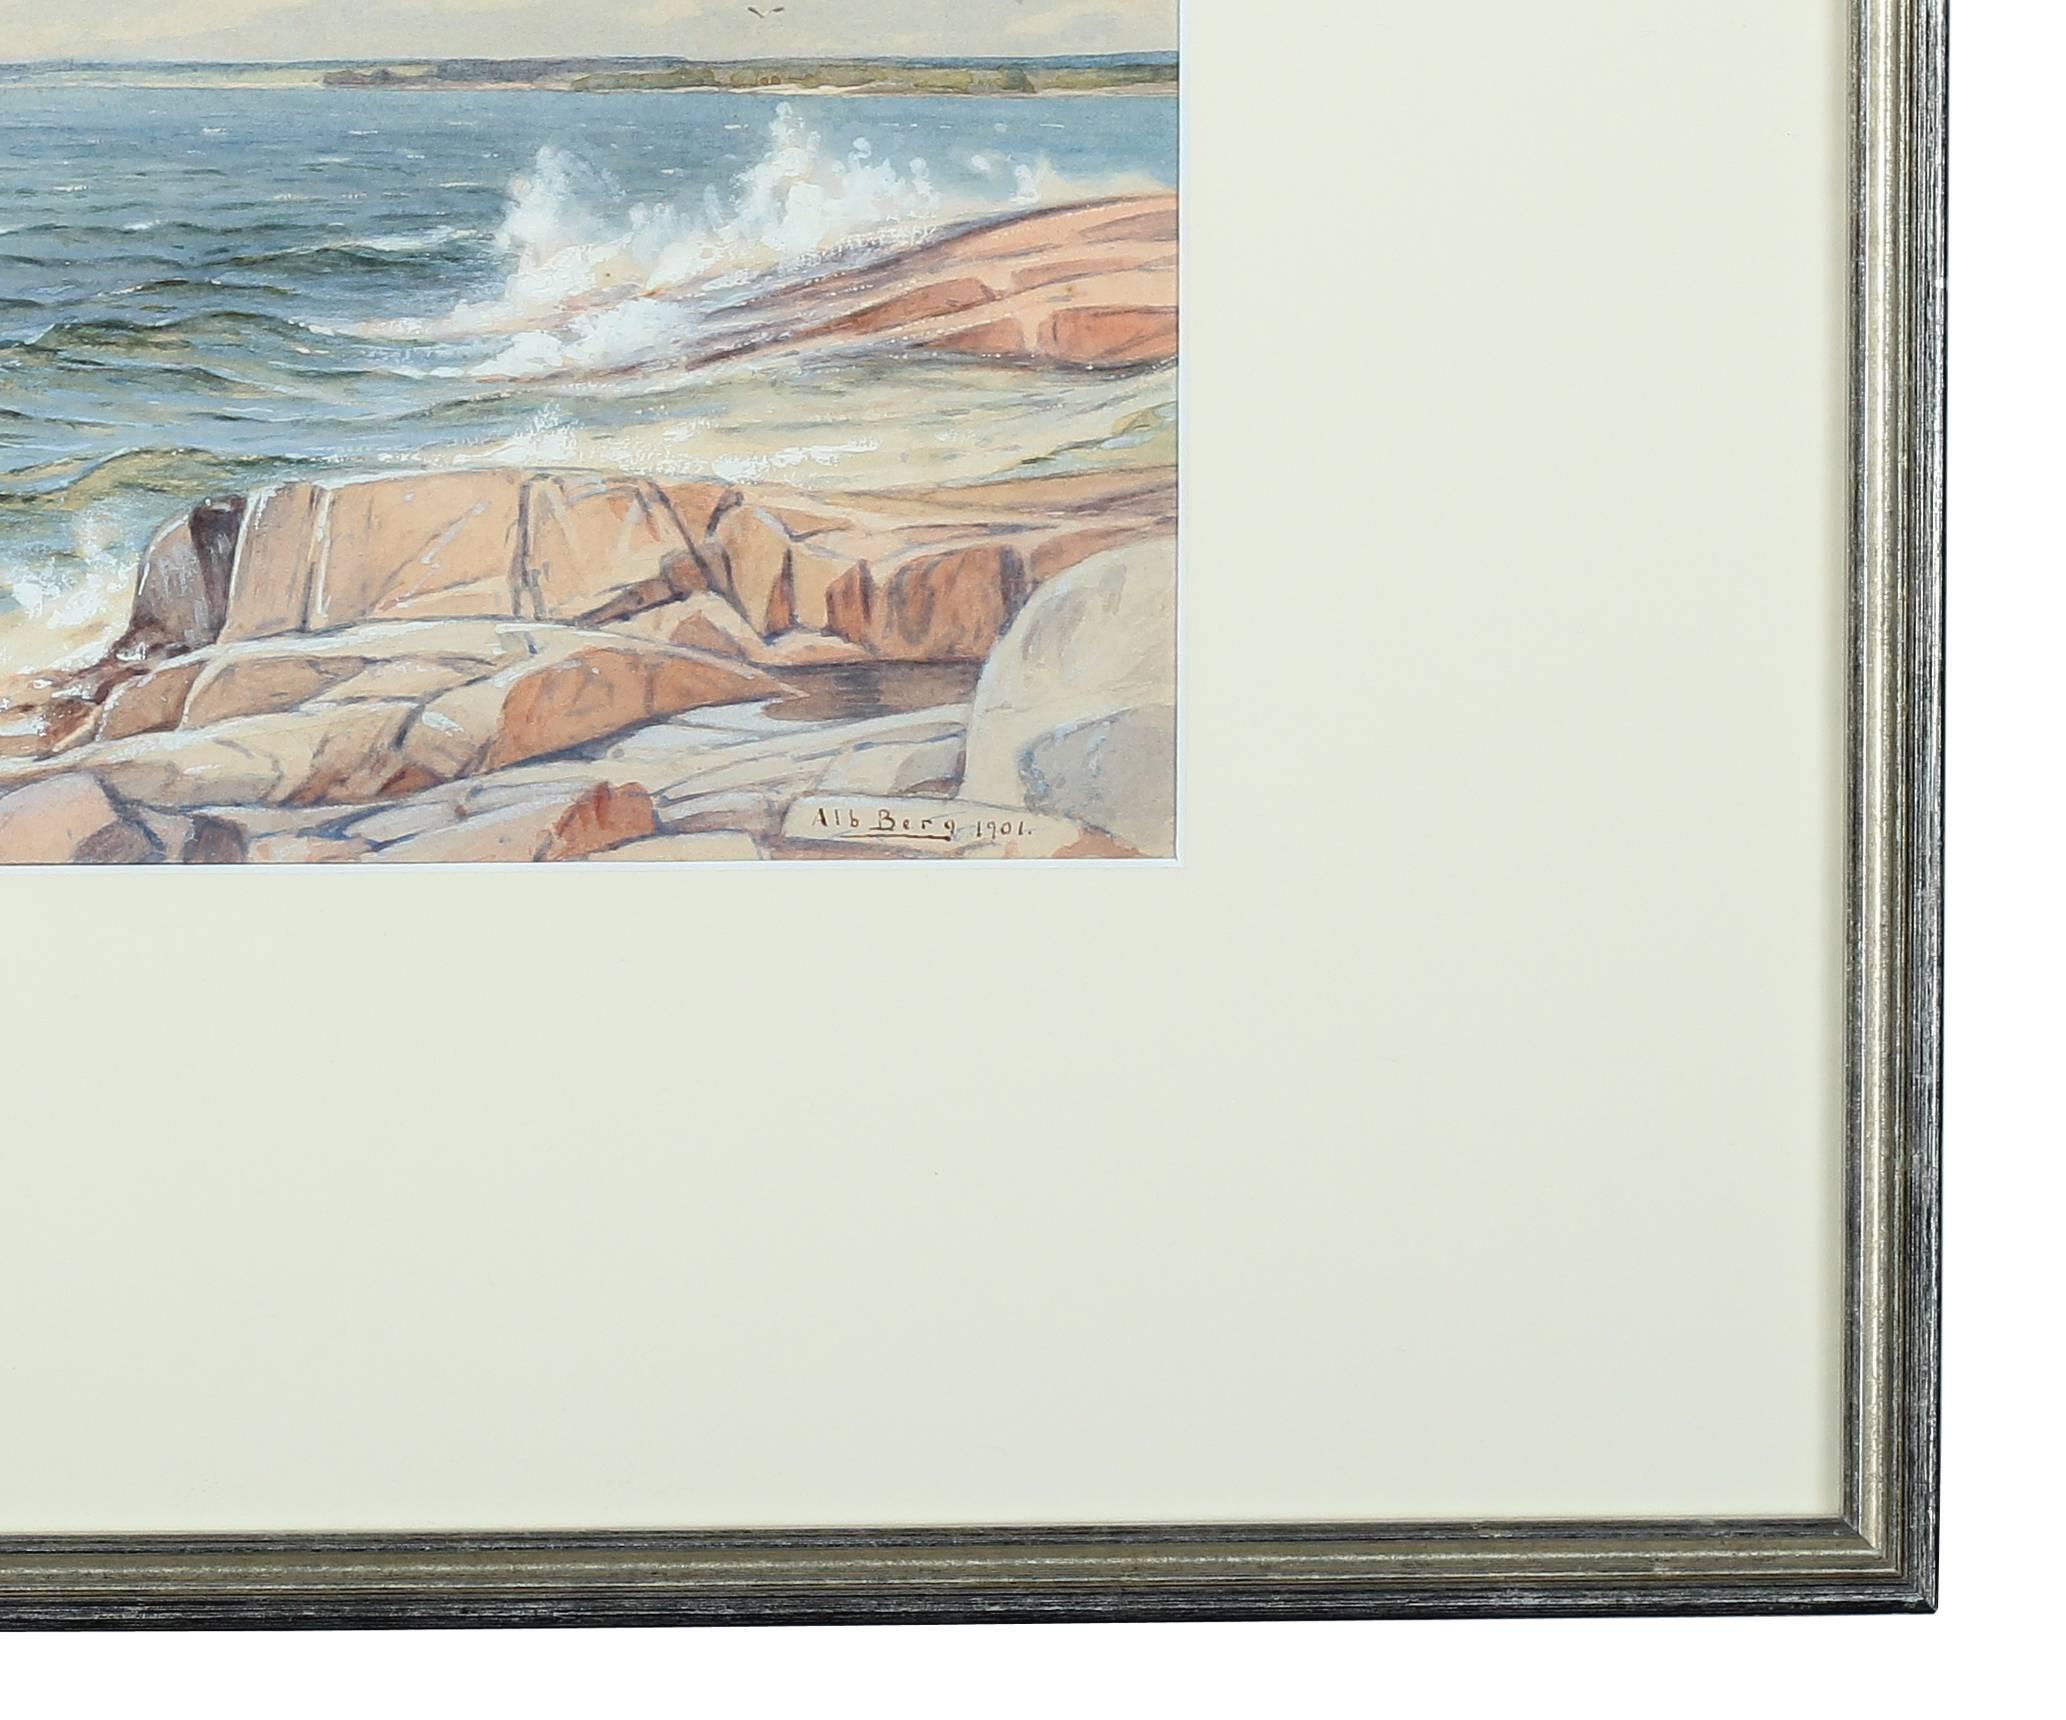 A watercolor with gouache painting of a 'Rocky Coast' by artist Albert Berg. A Swedish piece dating to 1901. The sight size measures 8.75 inches high by 14.75 inches wide and the frame size measures 18.25 inches high by 24.5 inches wide.